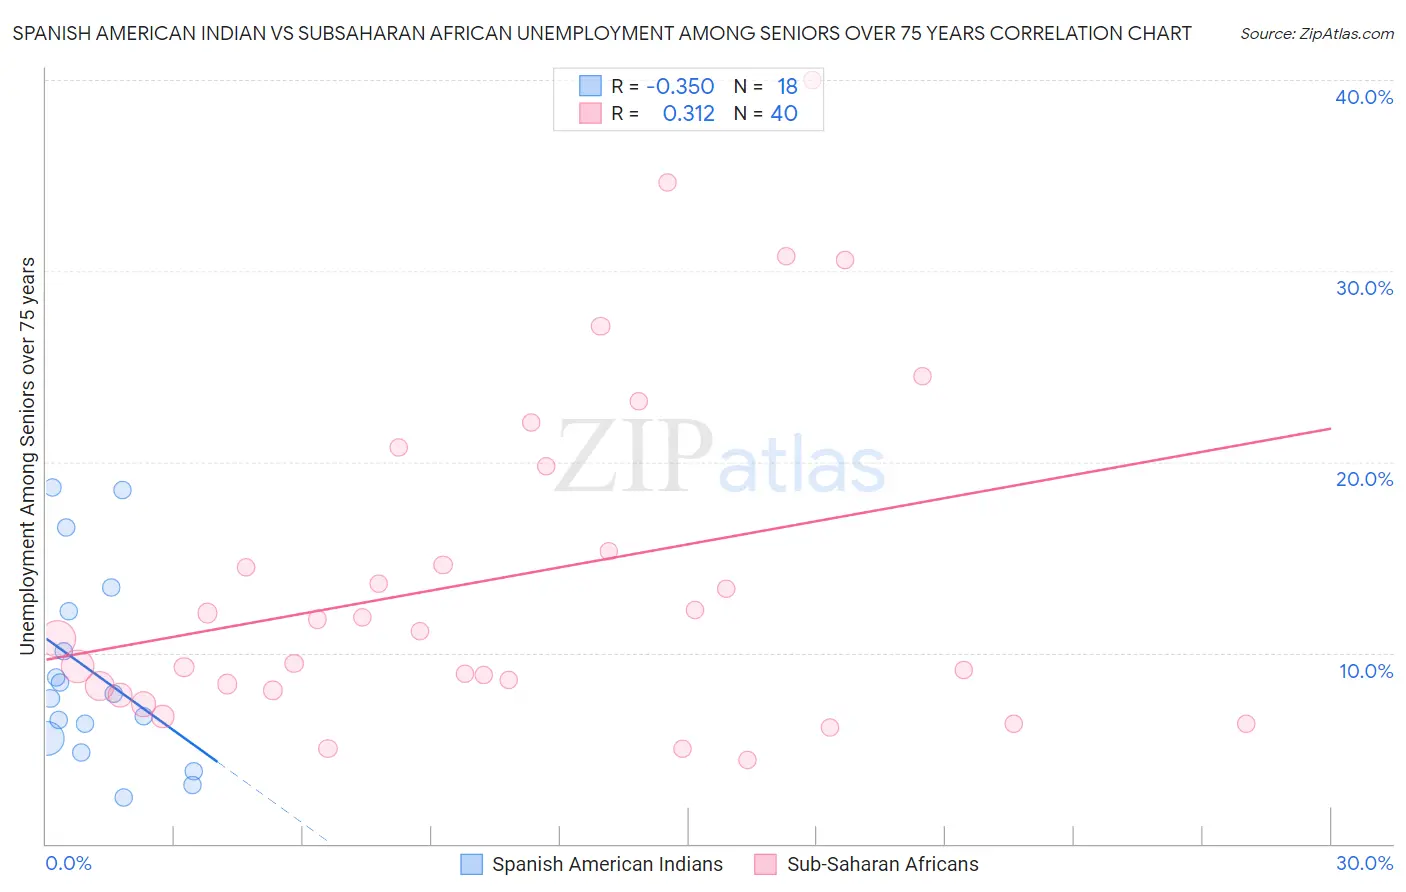 Spanish American Indian vs Subsaharan African Unemployment Among Seniors over 75 years